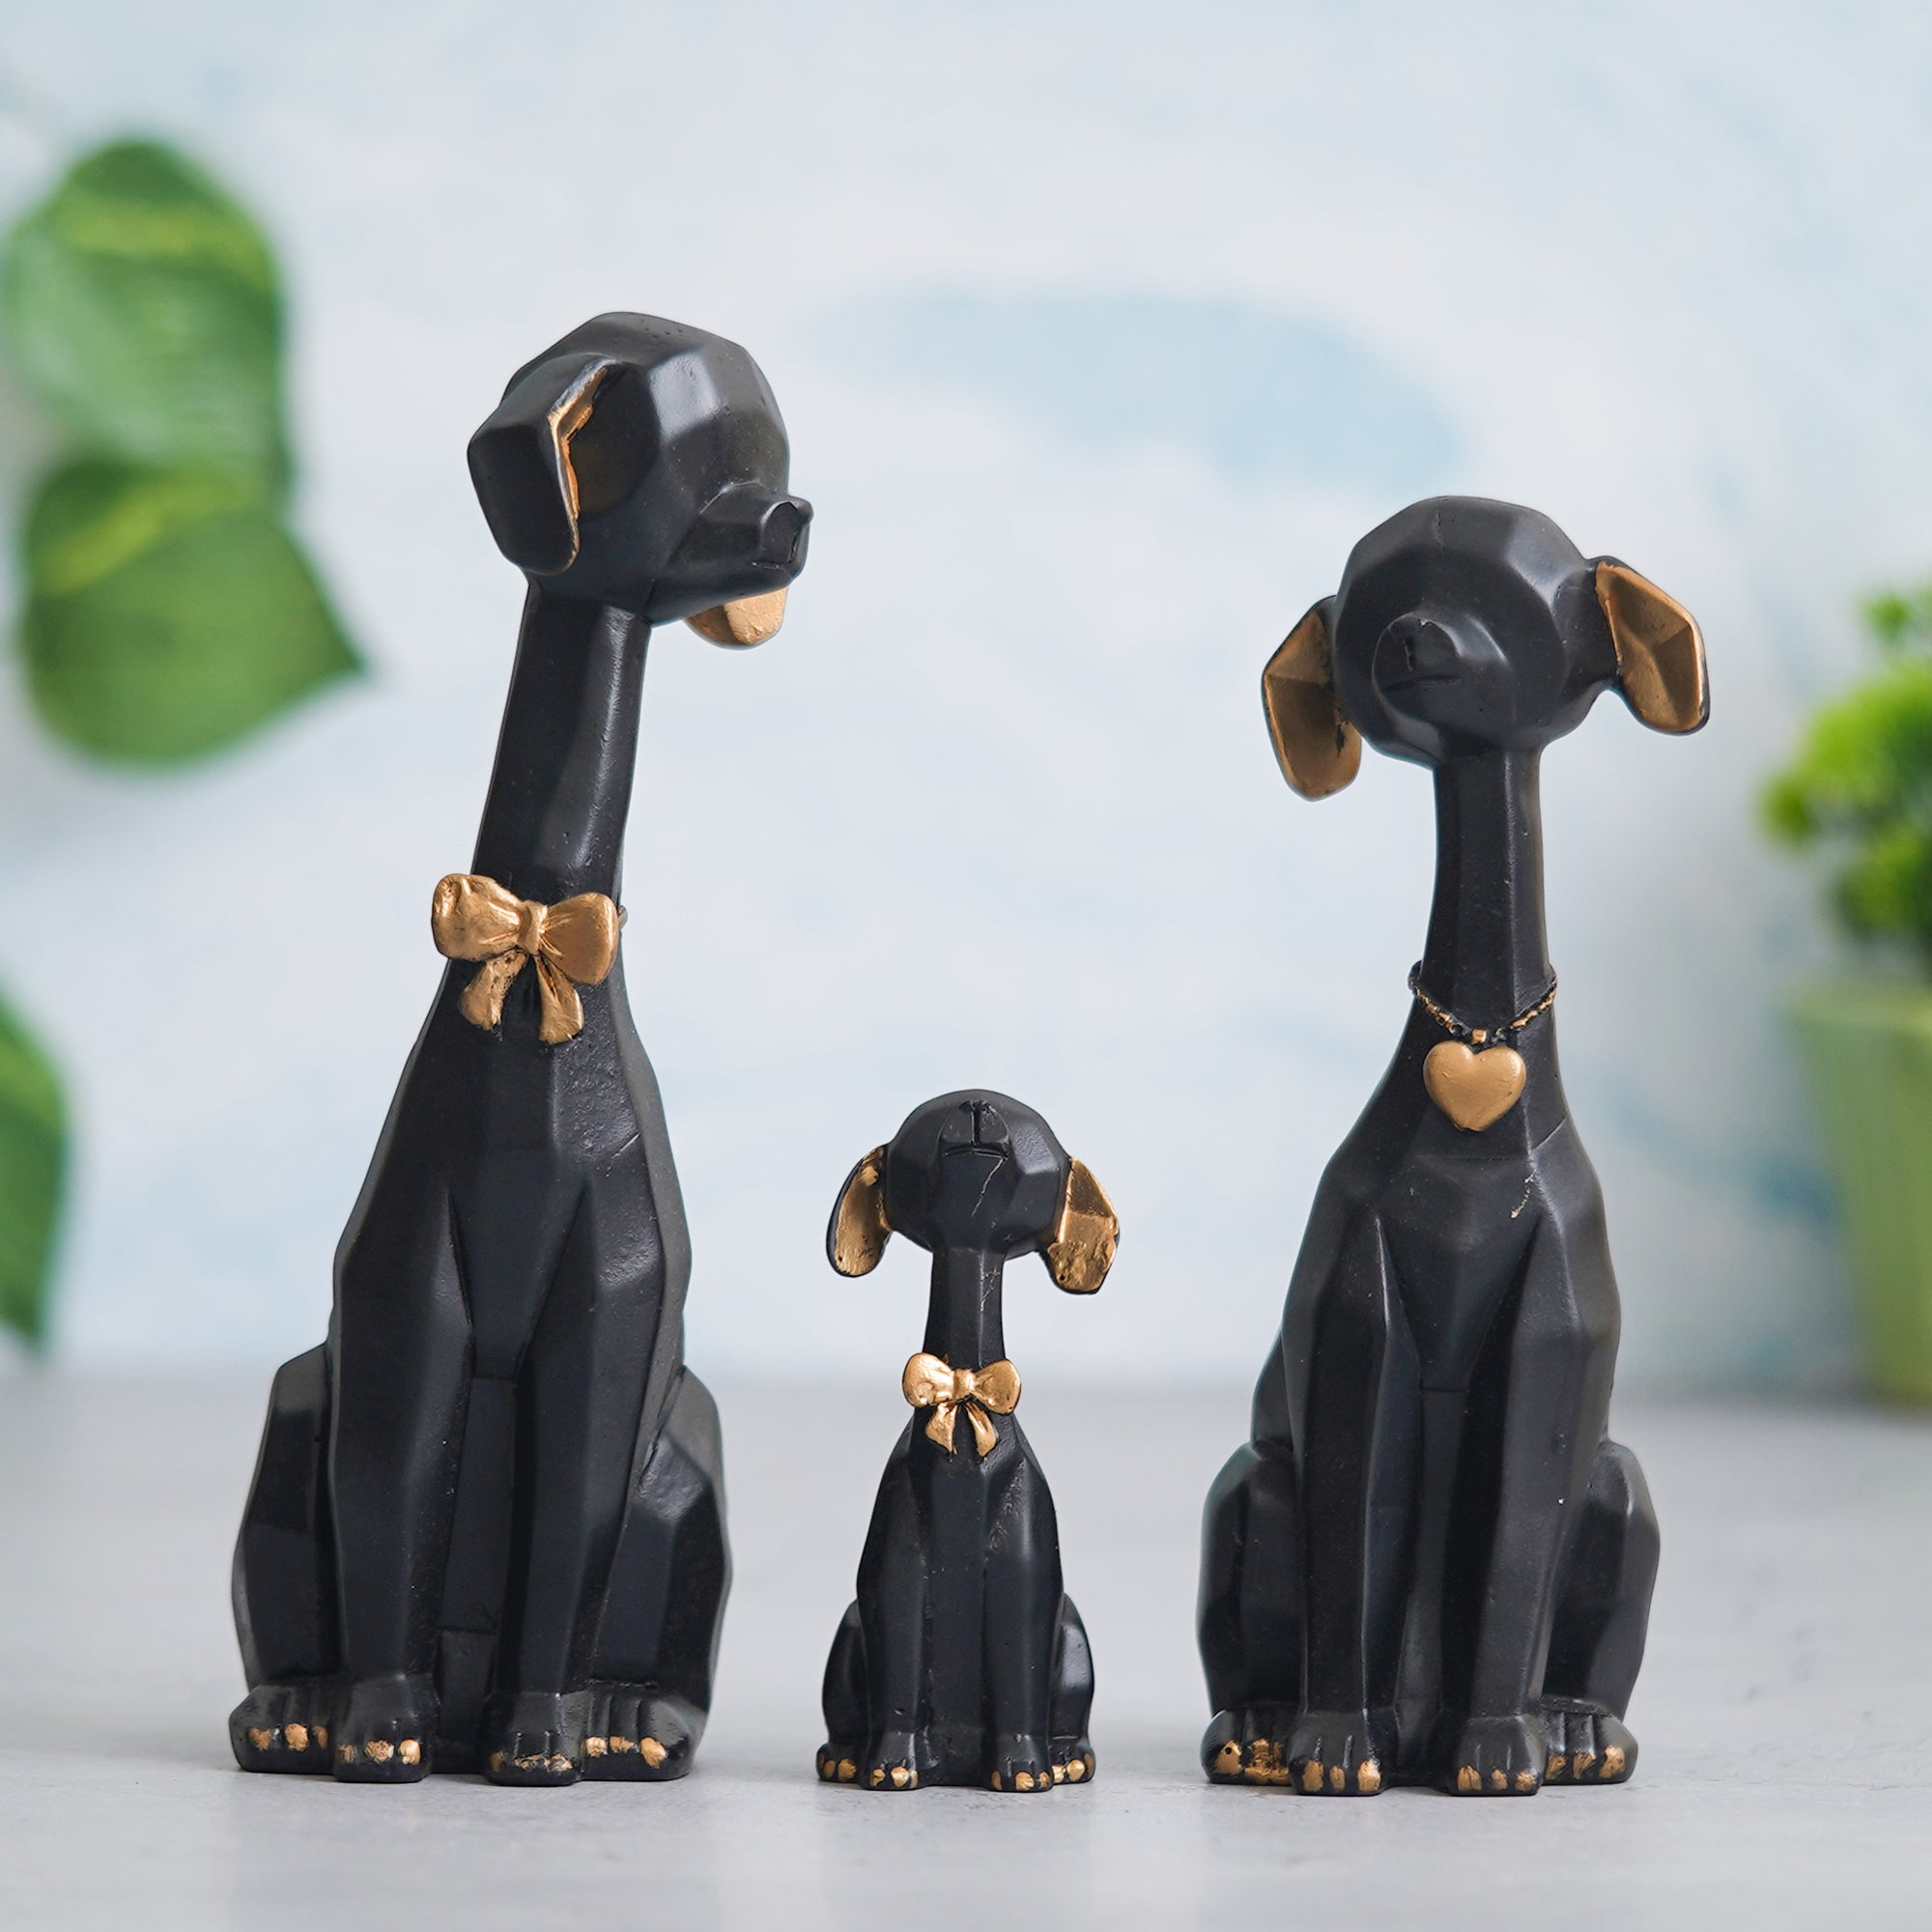 eCraftIndia Black and Golden Set of 3 Cute Dog Statues Animal Figurines Decorative Showpieces for Home Decor 4